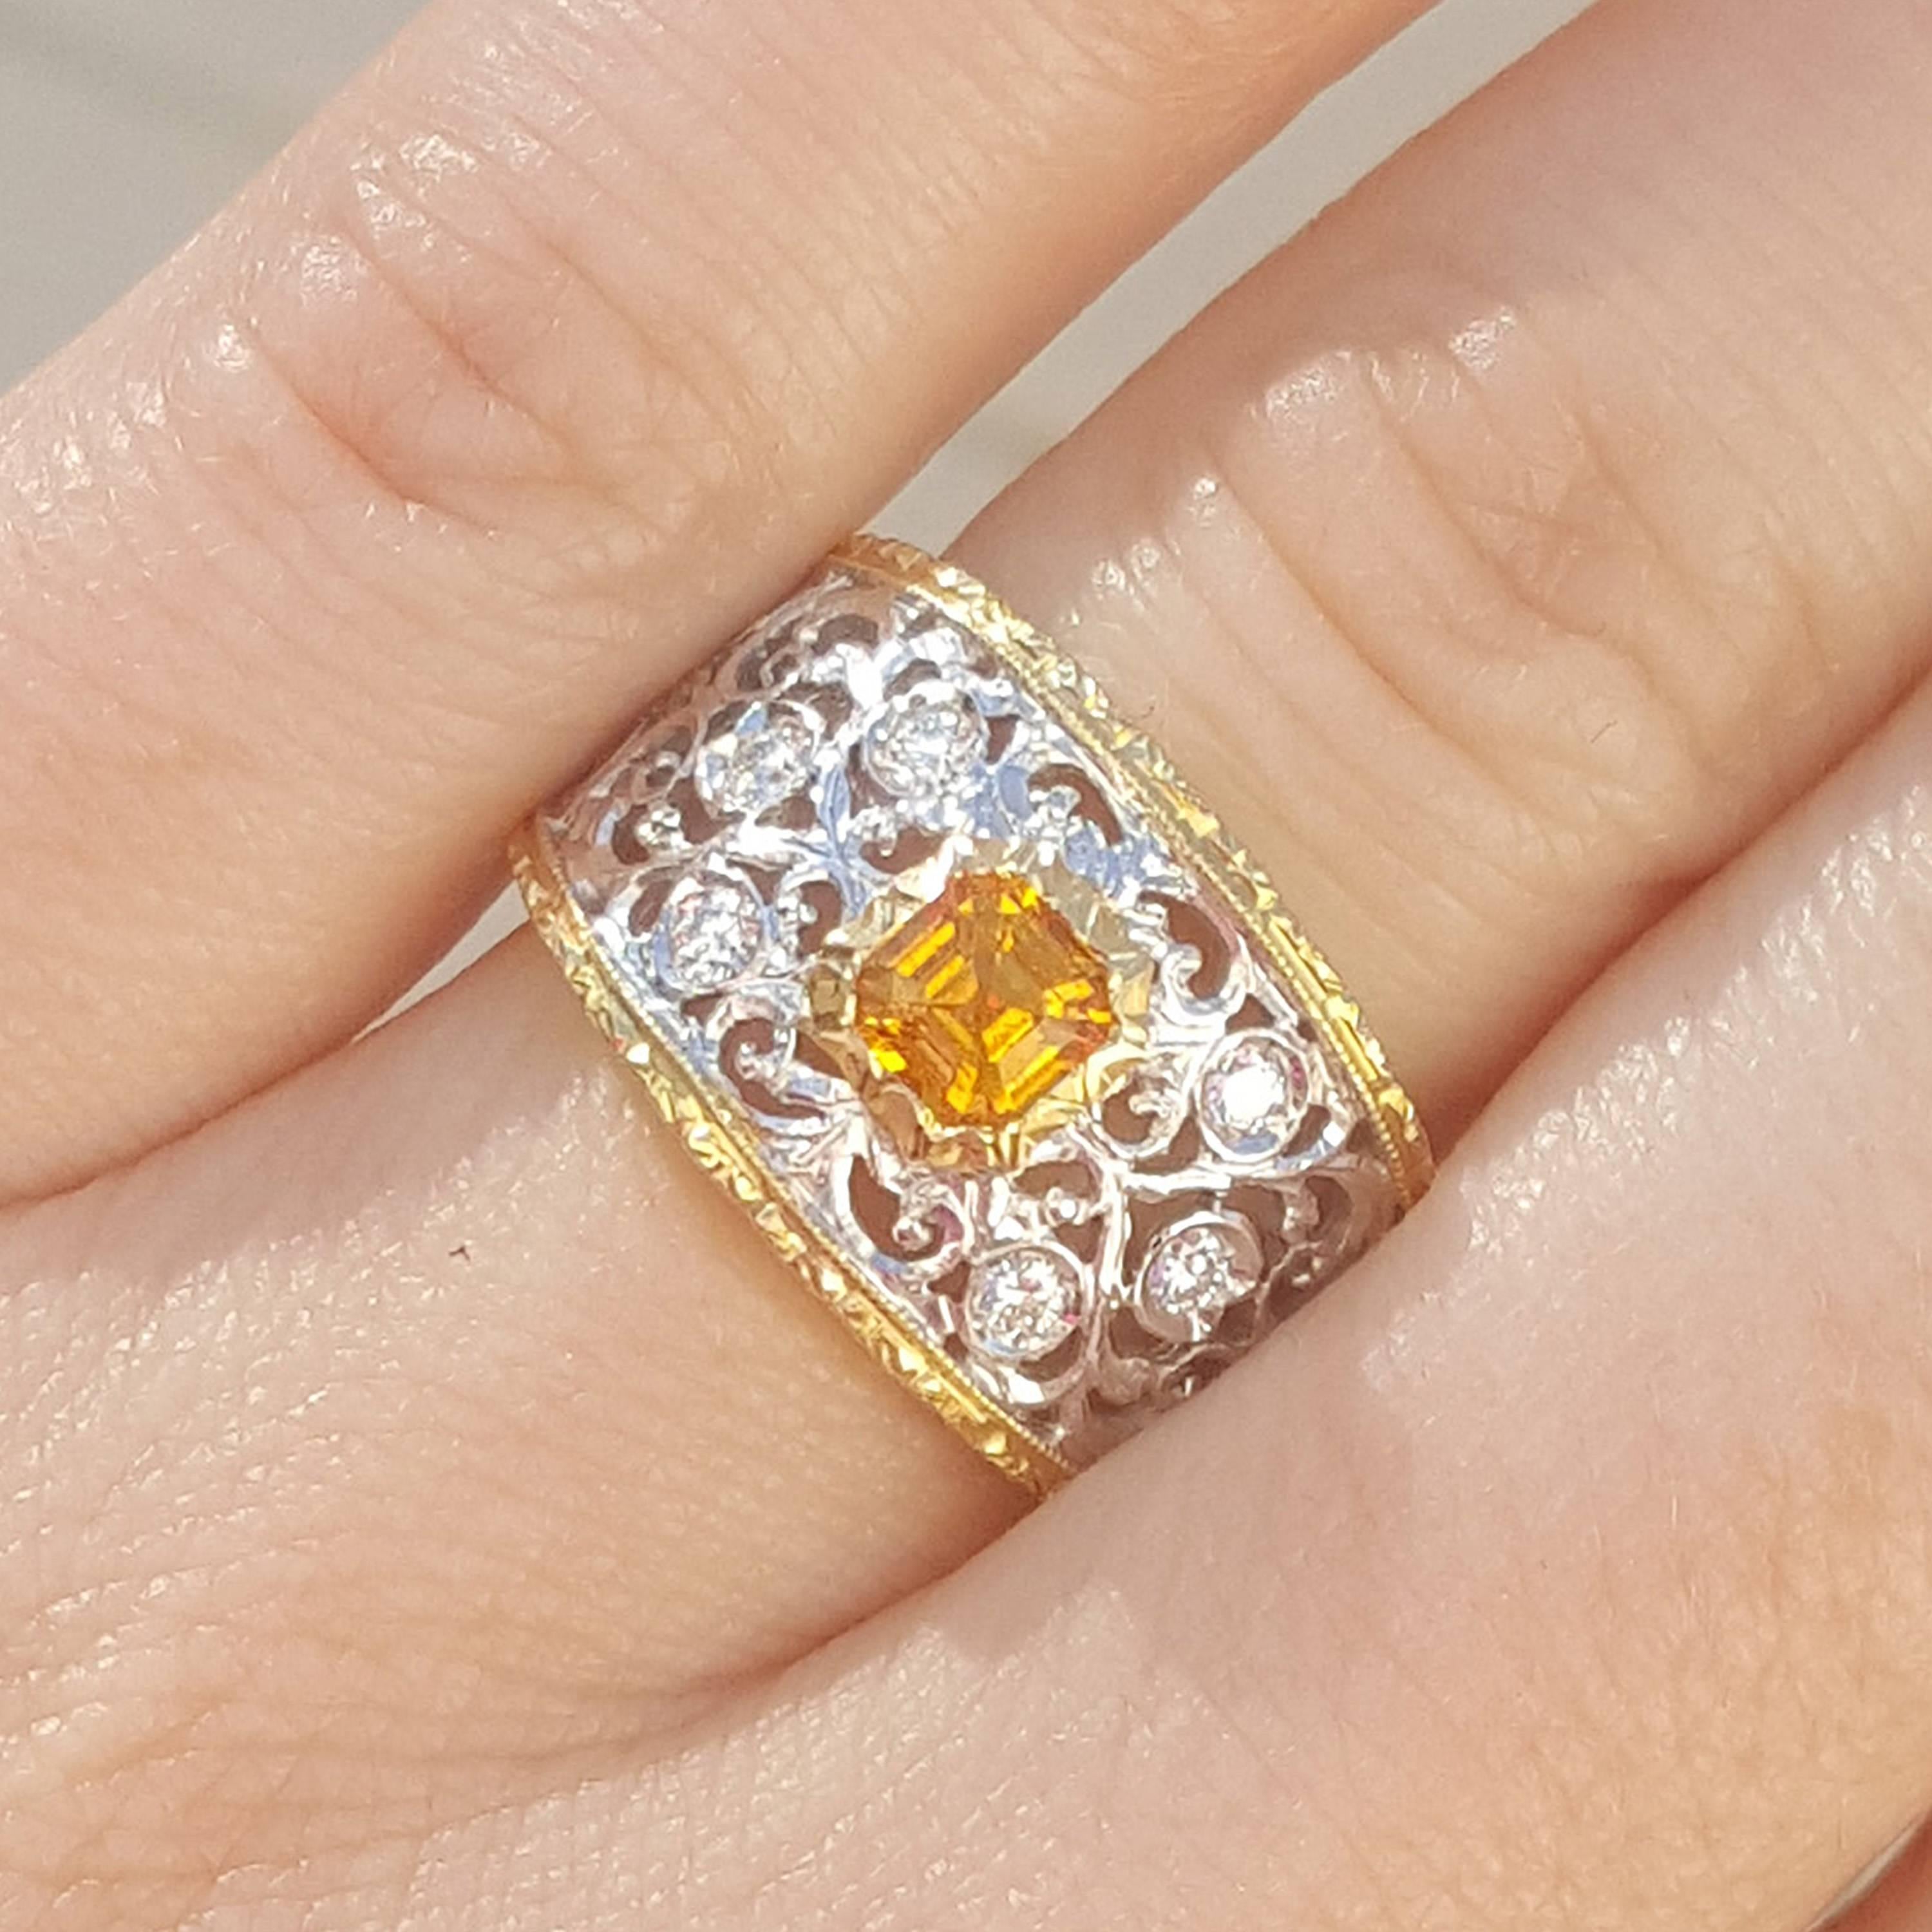 Mandarin Spessartite Garnet and Diamond 18kt Ring, Made in Florence, Italy In New Condition For Sale In Logan, UT